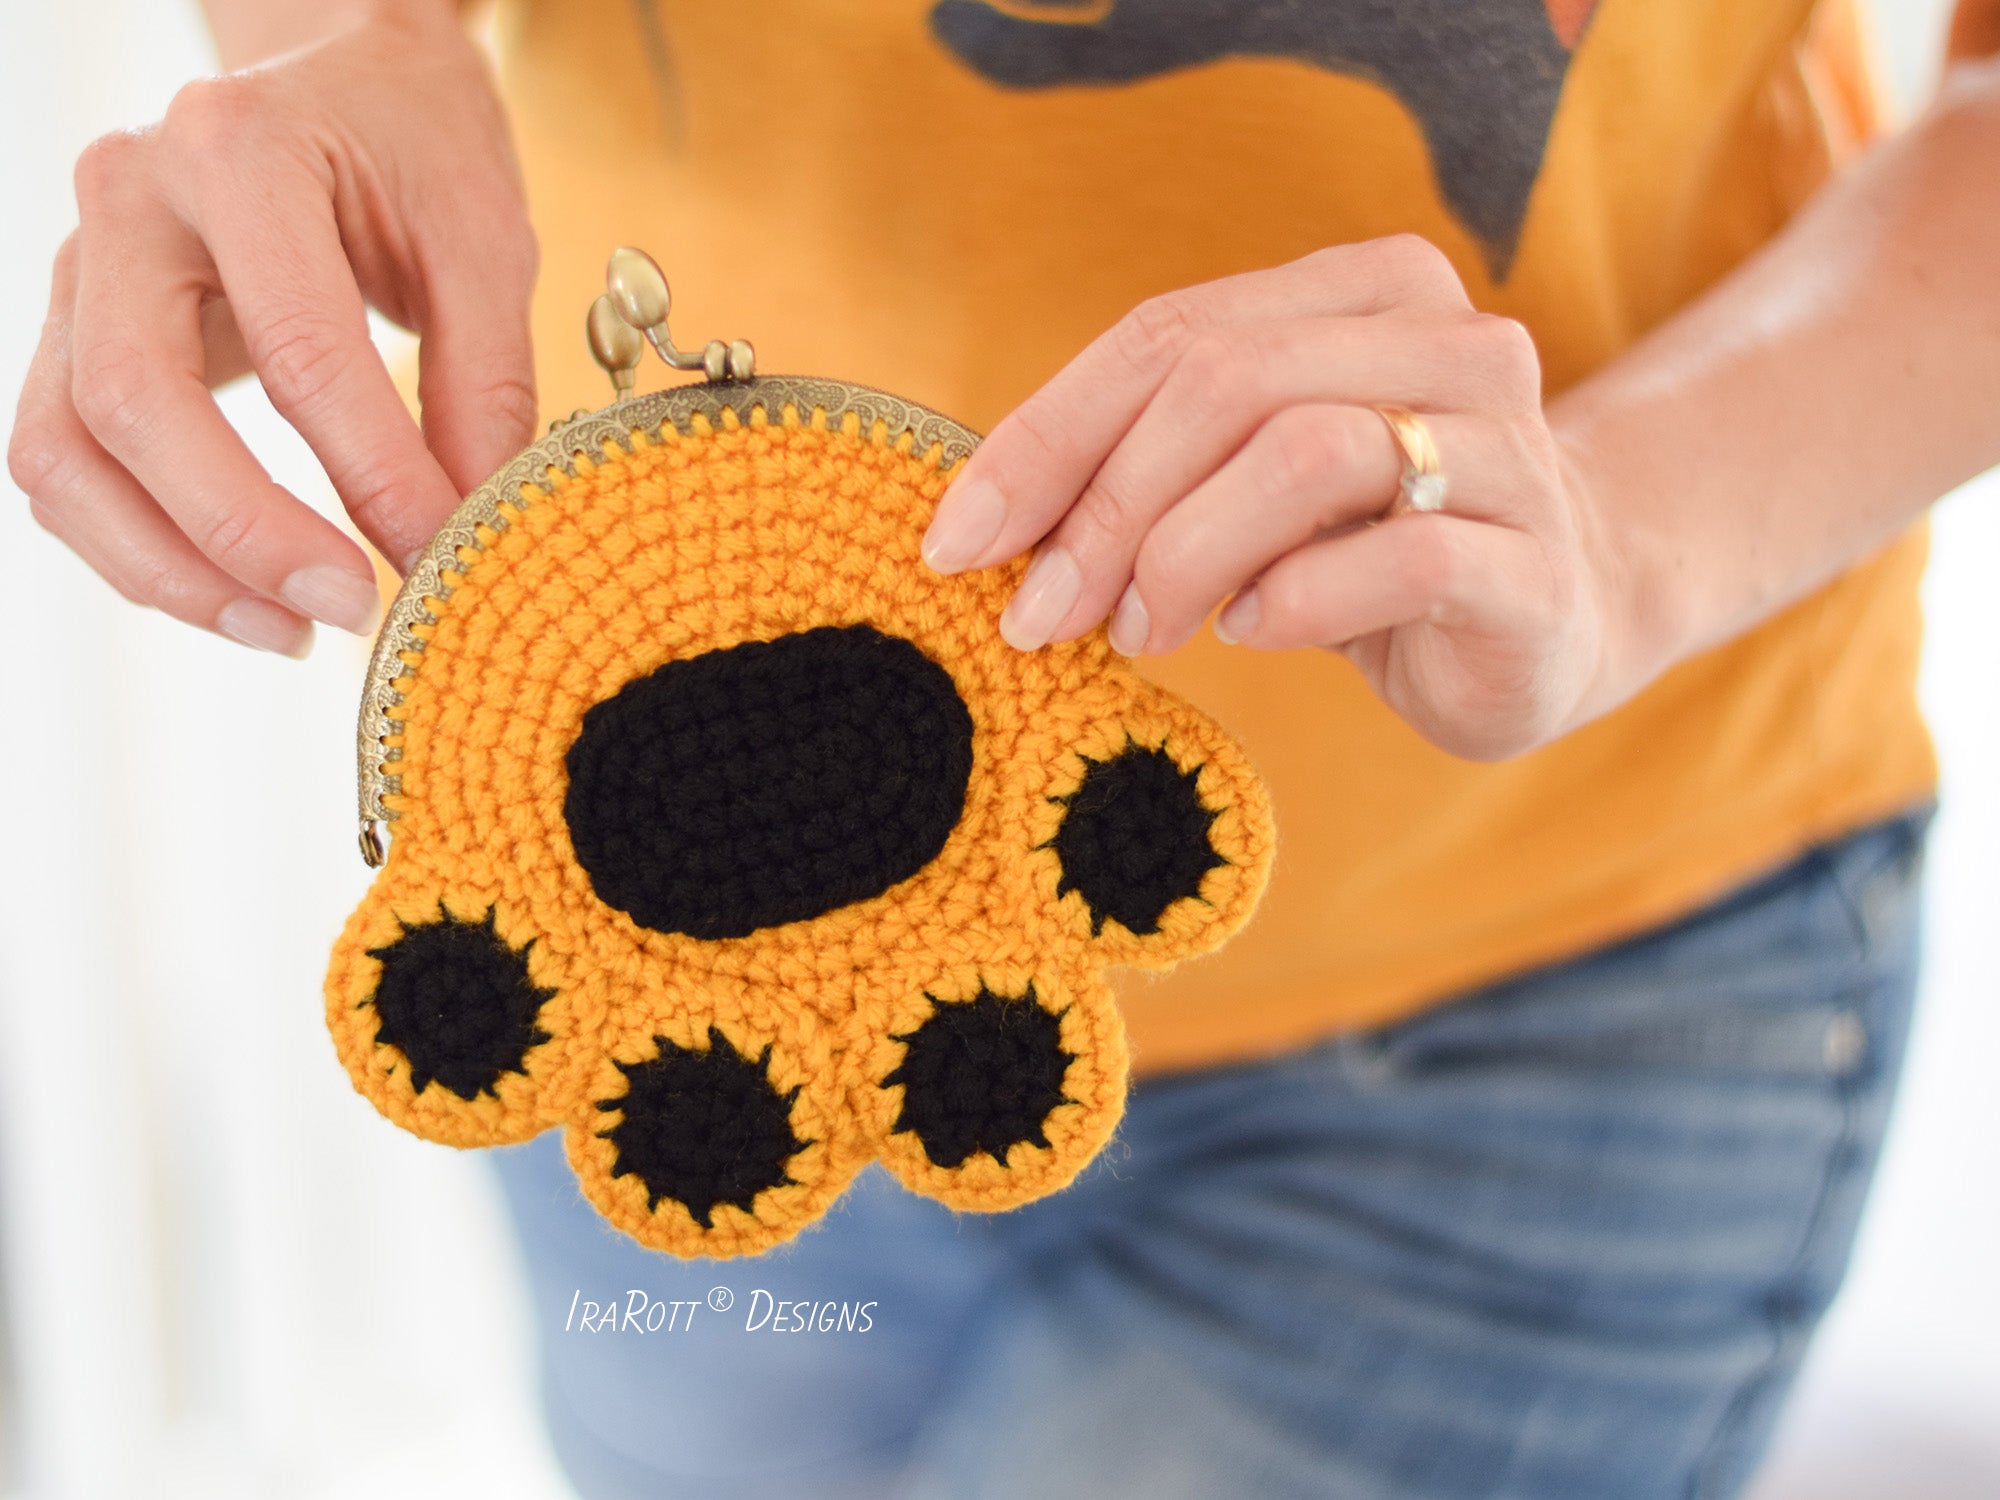 Crochet Coin Purse - Repeat Crafter Me